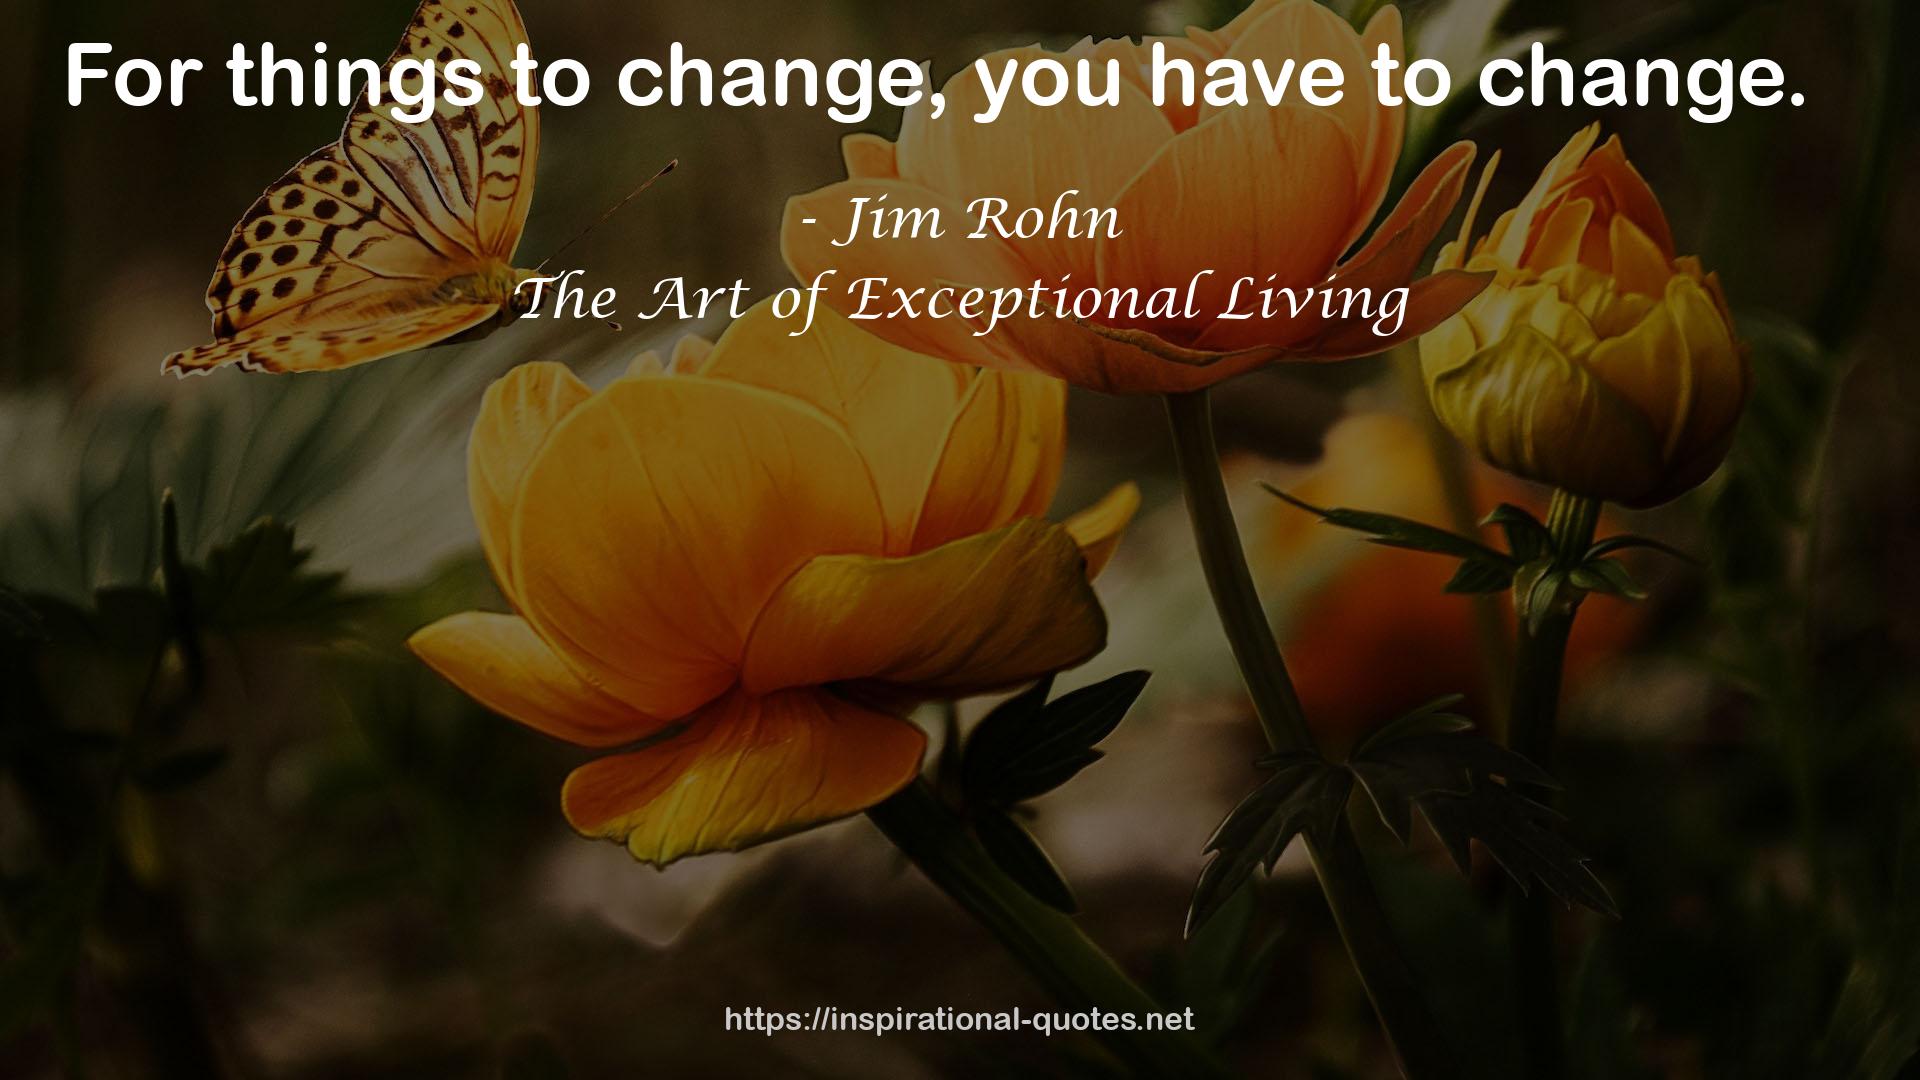 The Art of Exceptional Living QUOTES